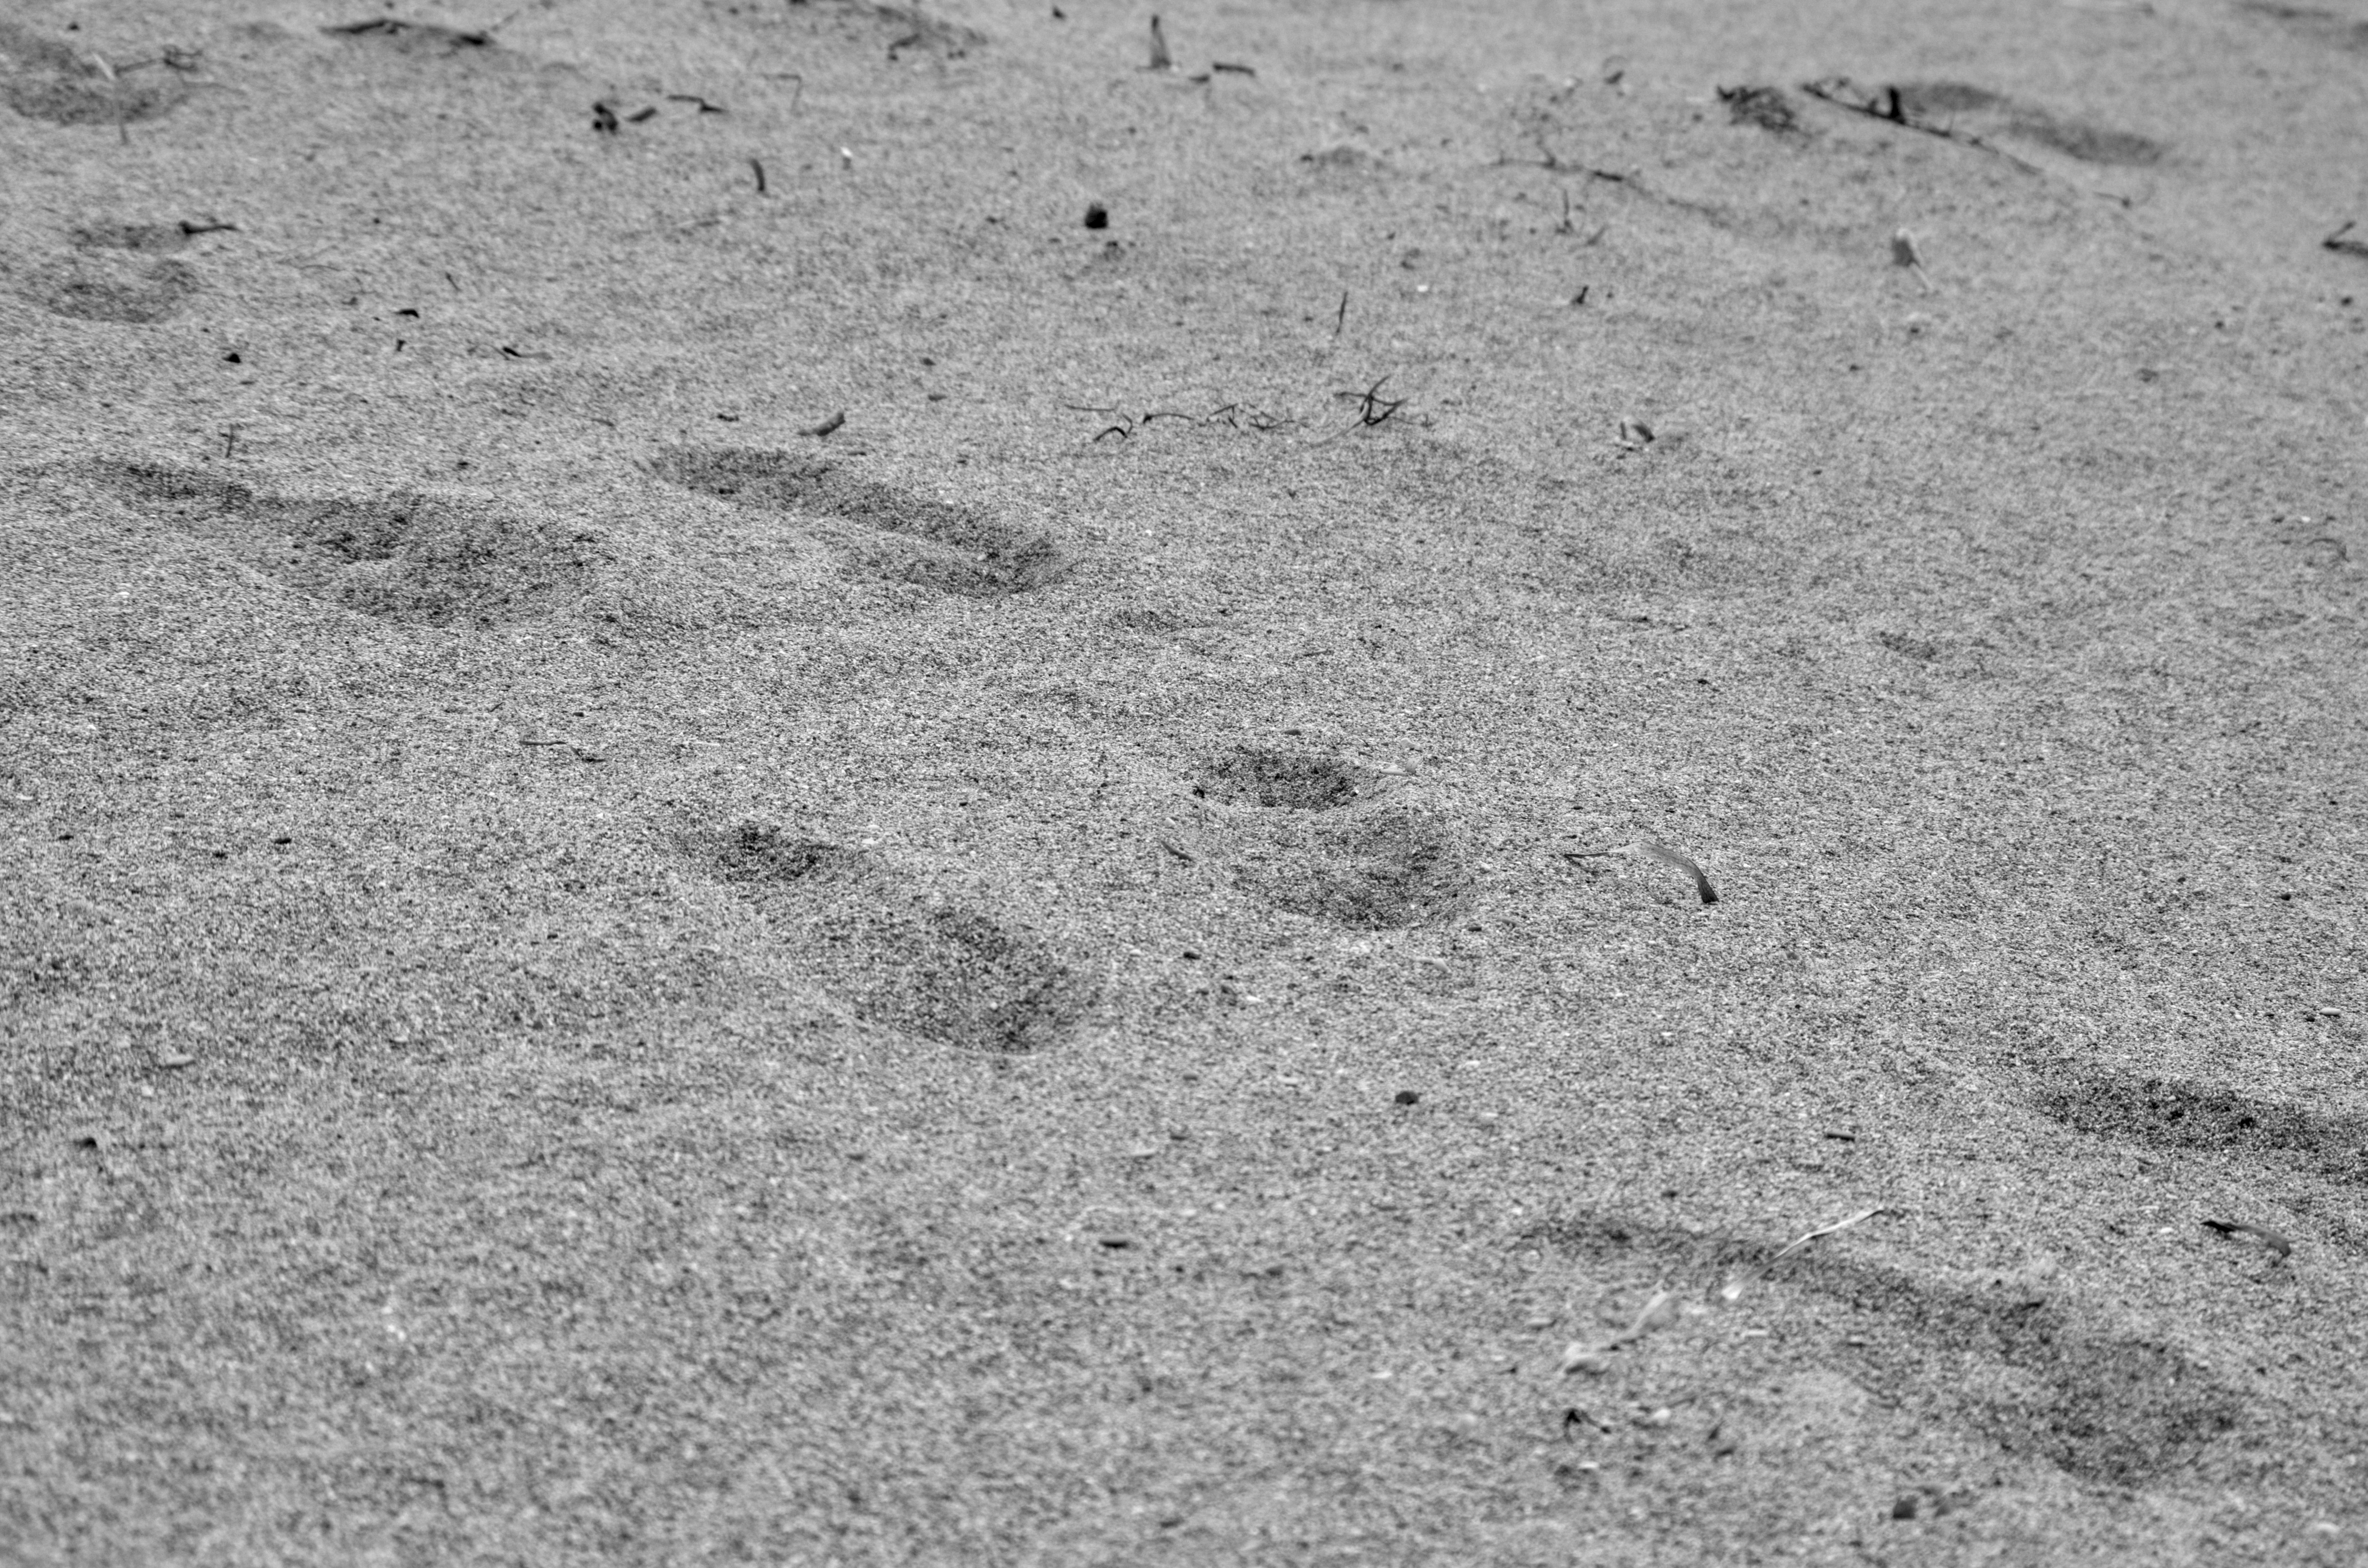 General 4928x3264 monochrome photography sand beach summer foot prints outdoors